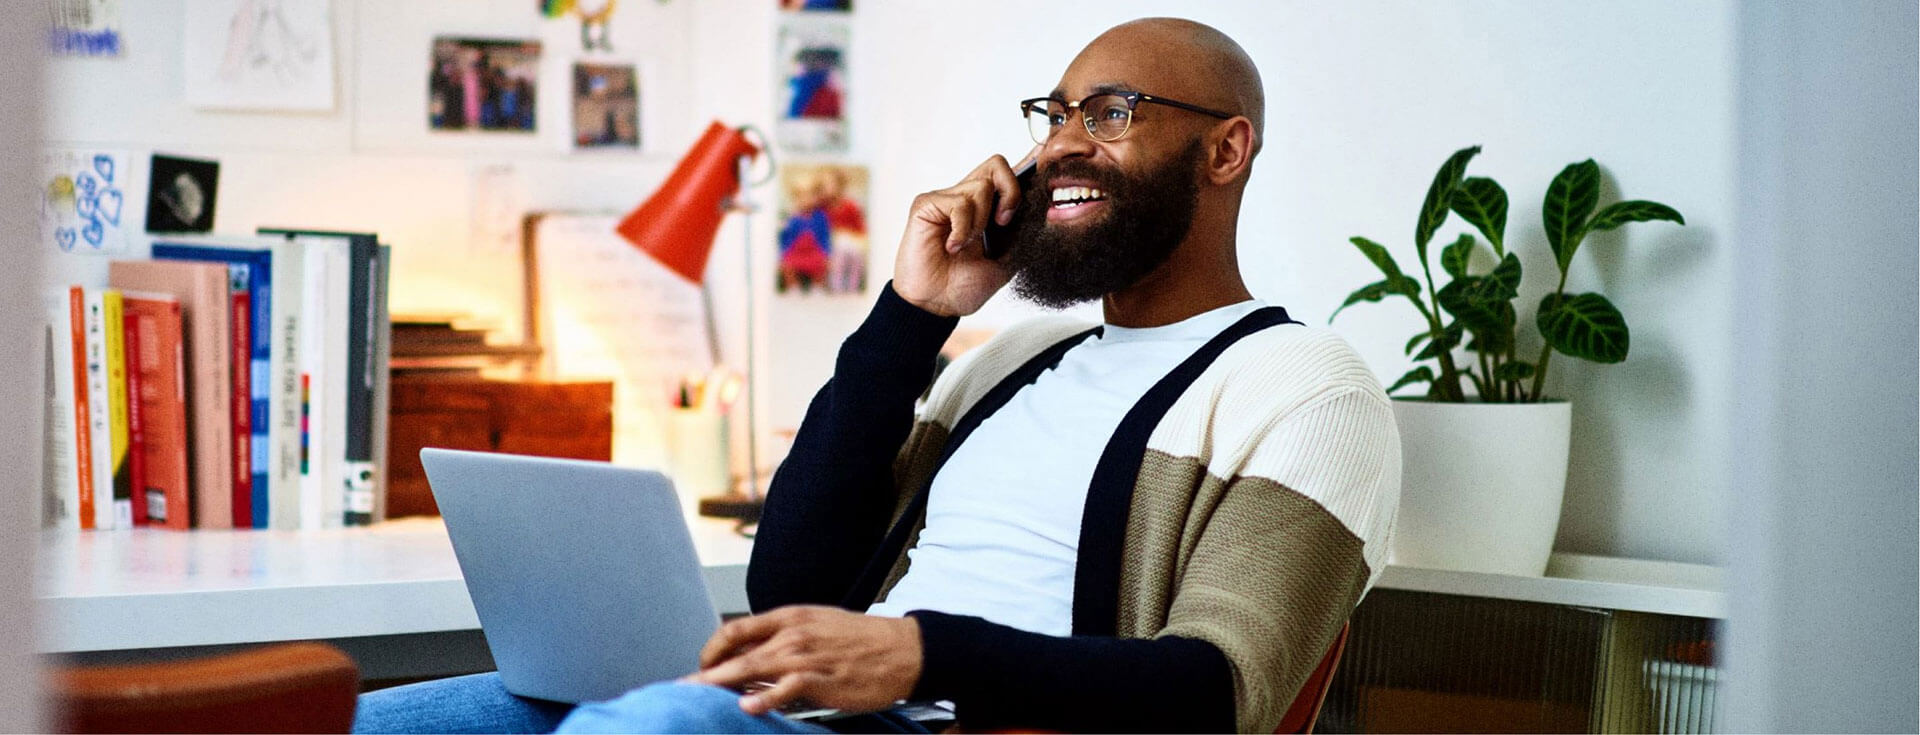 Man smiling at desk talking on the phone.